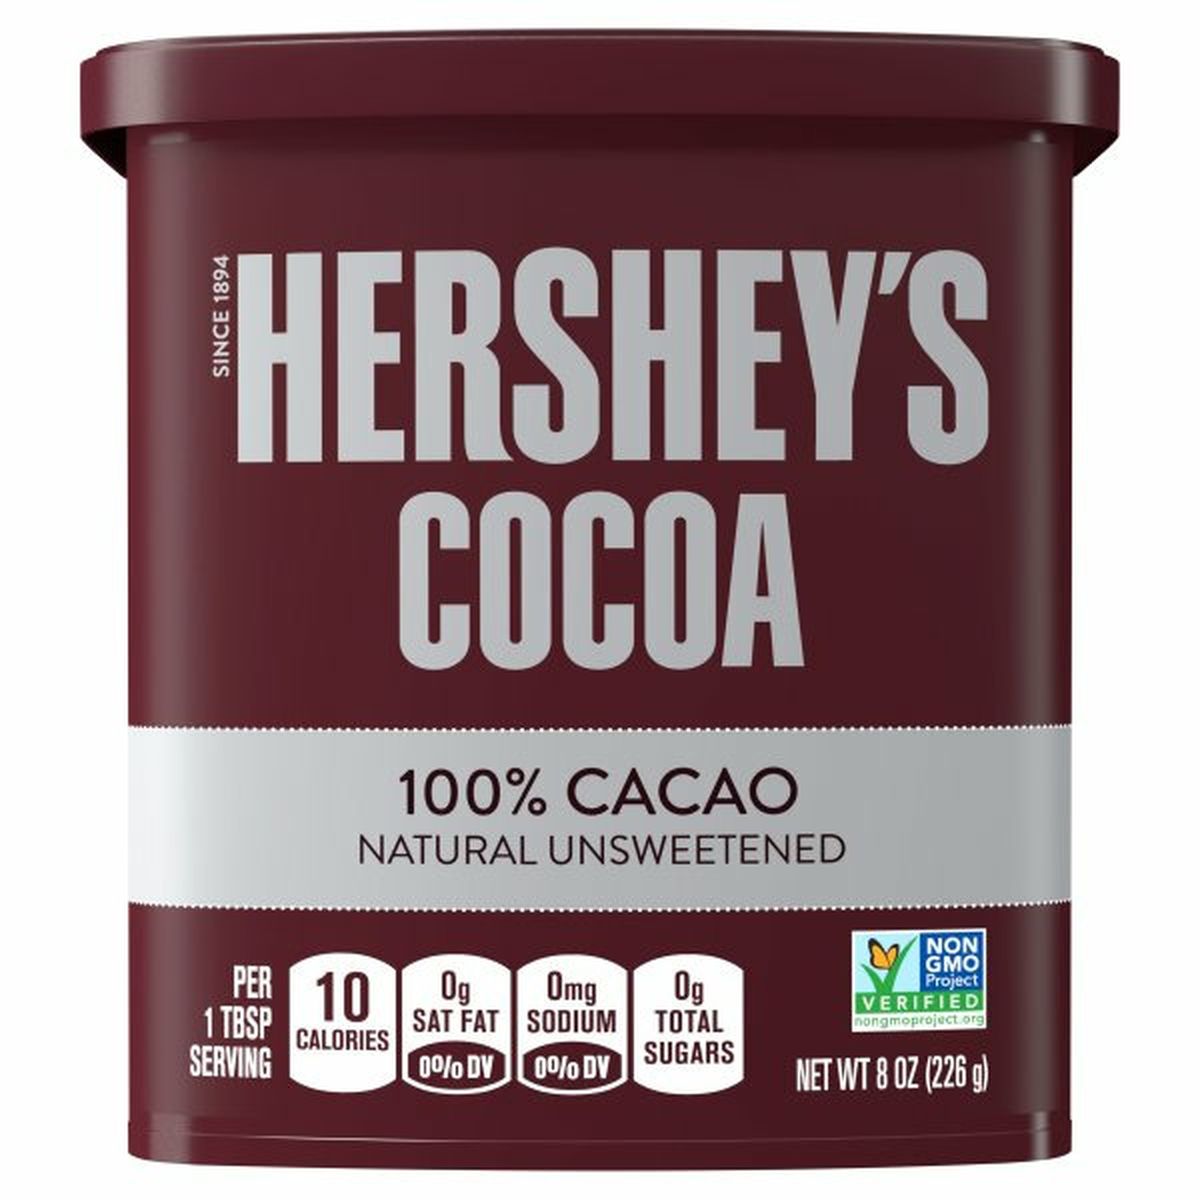 Calories in Hershey's Cocoa, Unsweetened, 100% Cacao, Natural, Chocolate